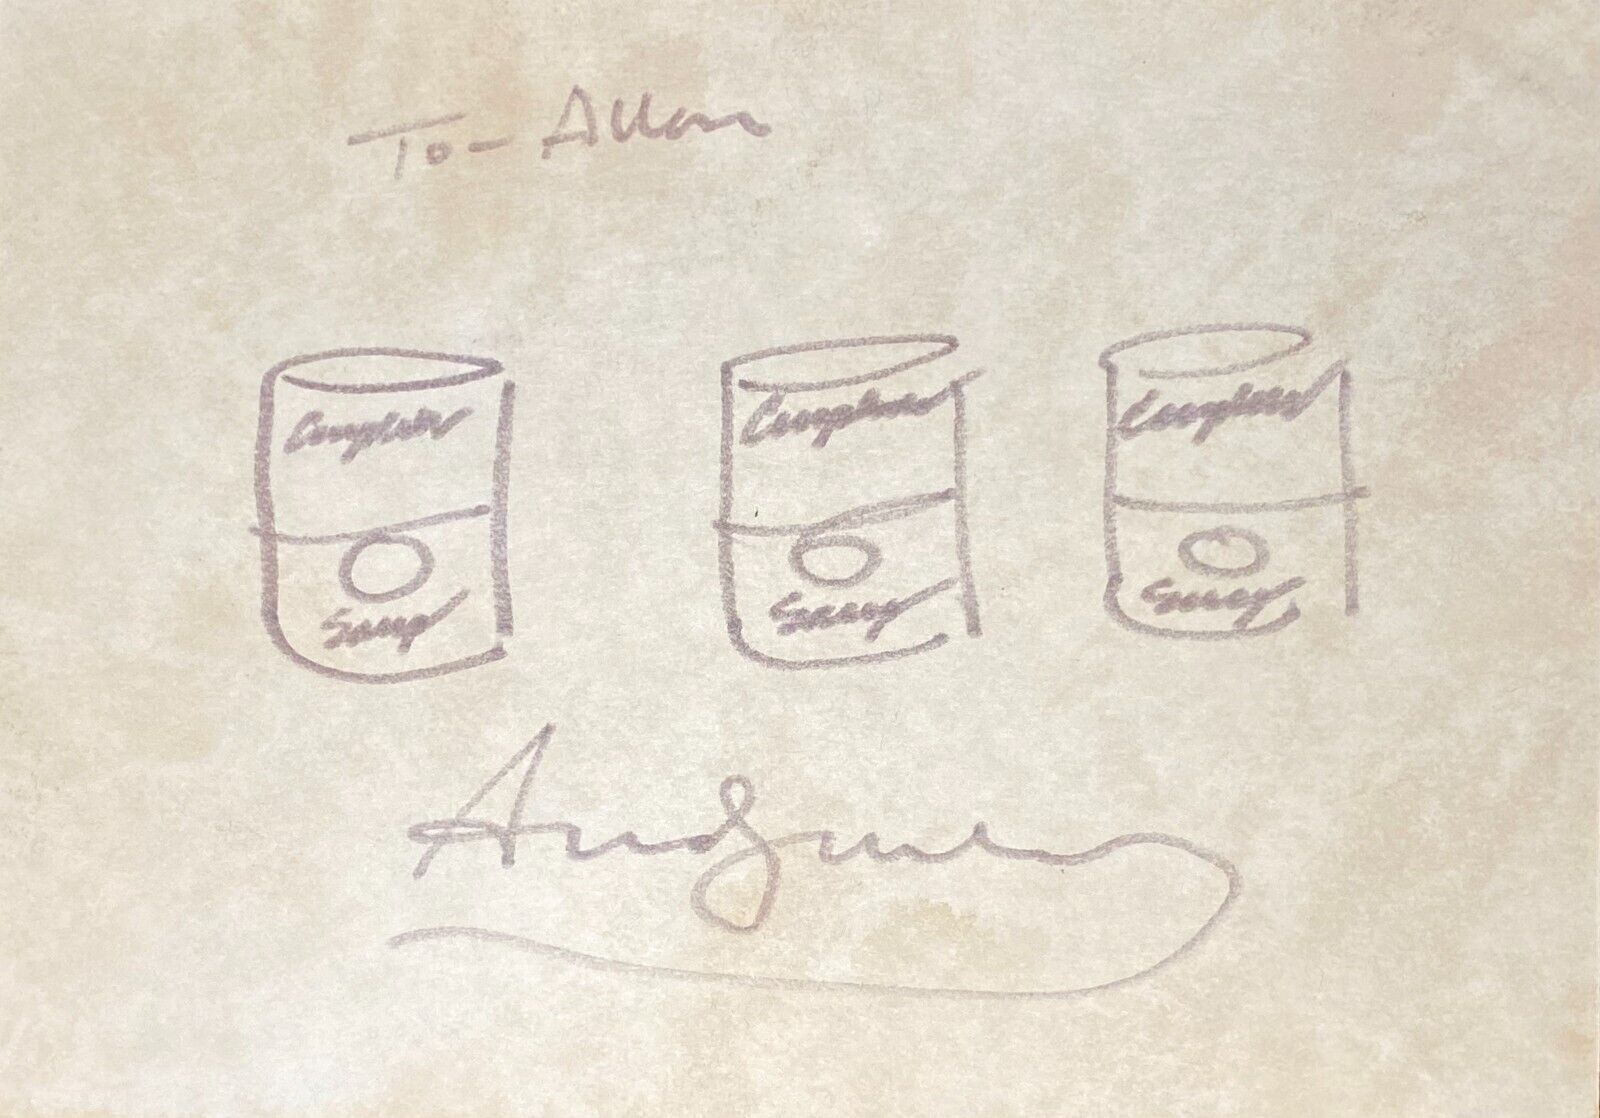 UNIQUE ANDY WARHOL ILLUSTRATION, SIGNED - RARE THREE SOUP CANS AT ONCE